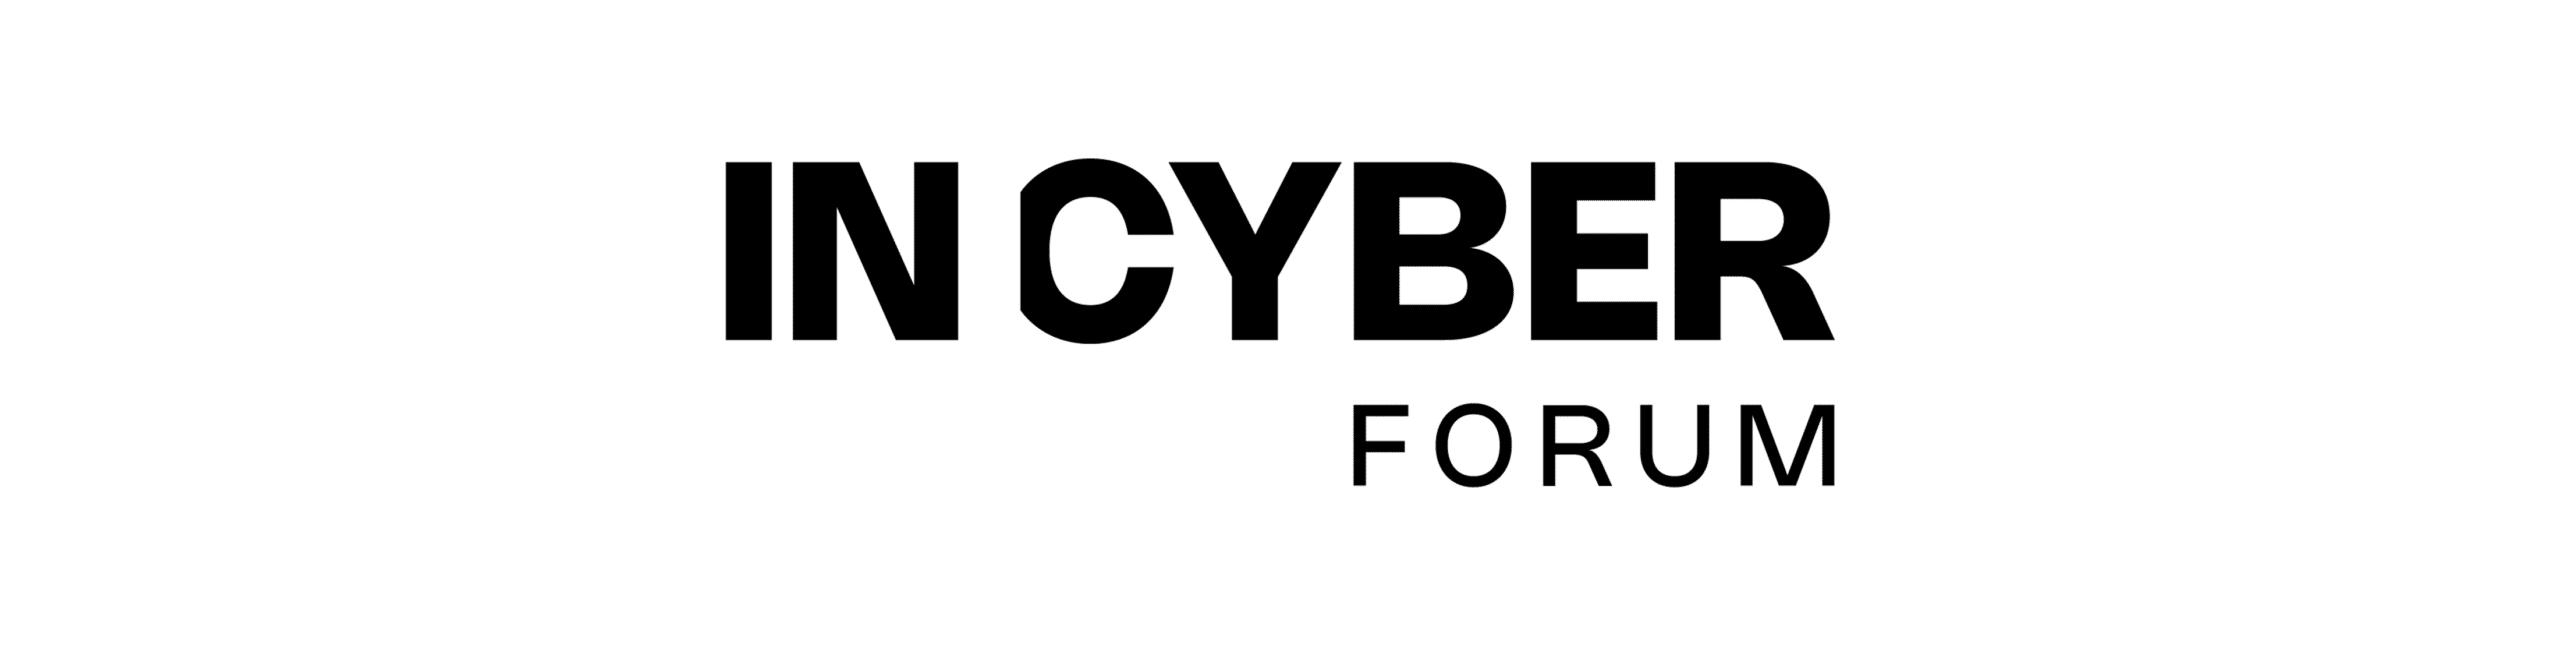 Meet Our Experts at Forum InCyber Europe!